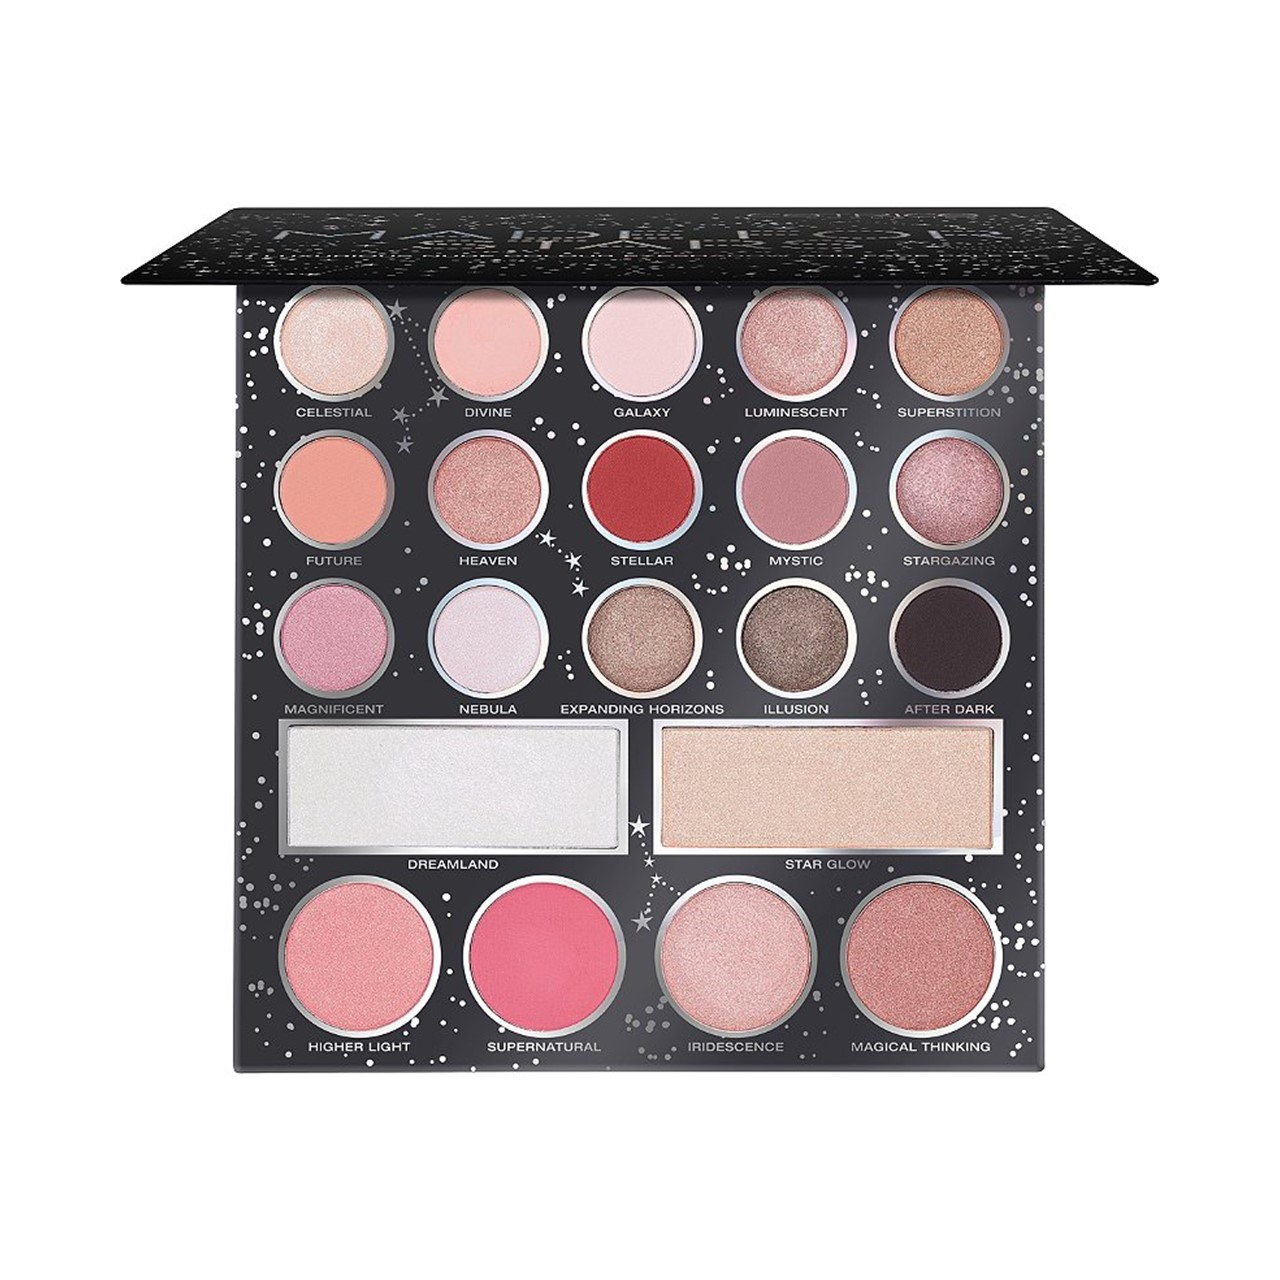 21 FOR Luxurious Nude Catrice Eyeshadow STARS Palette · MADE Face & Buy USA